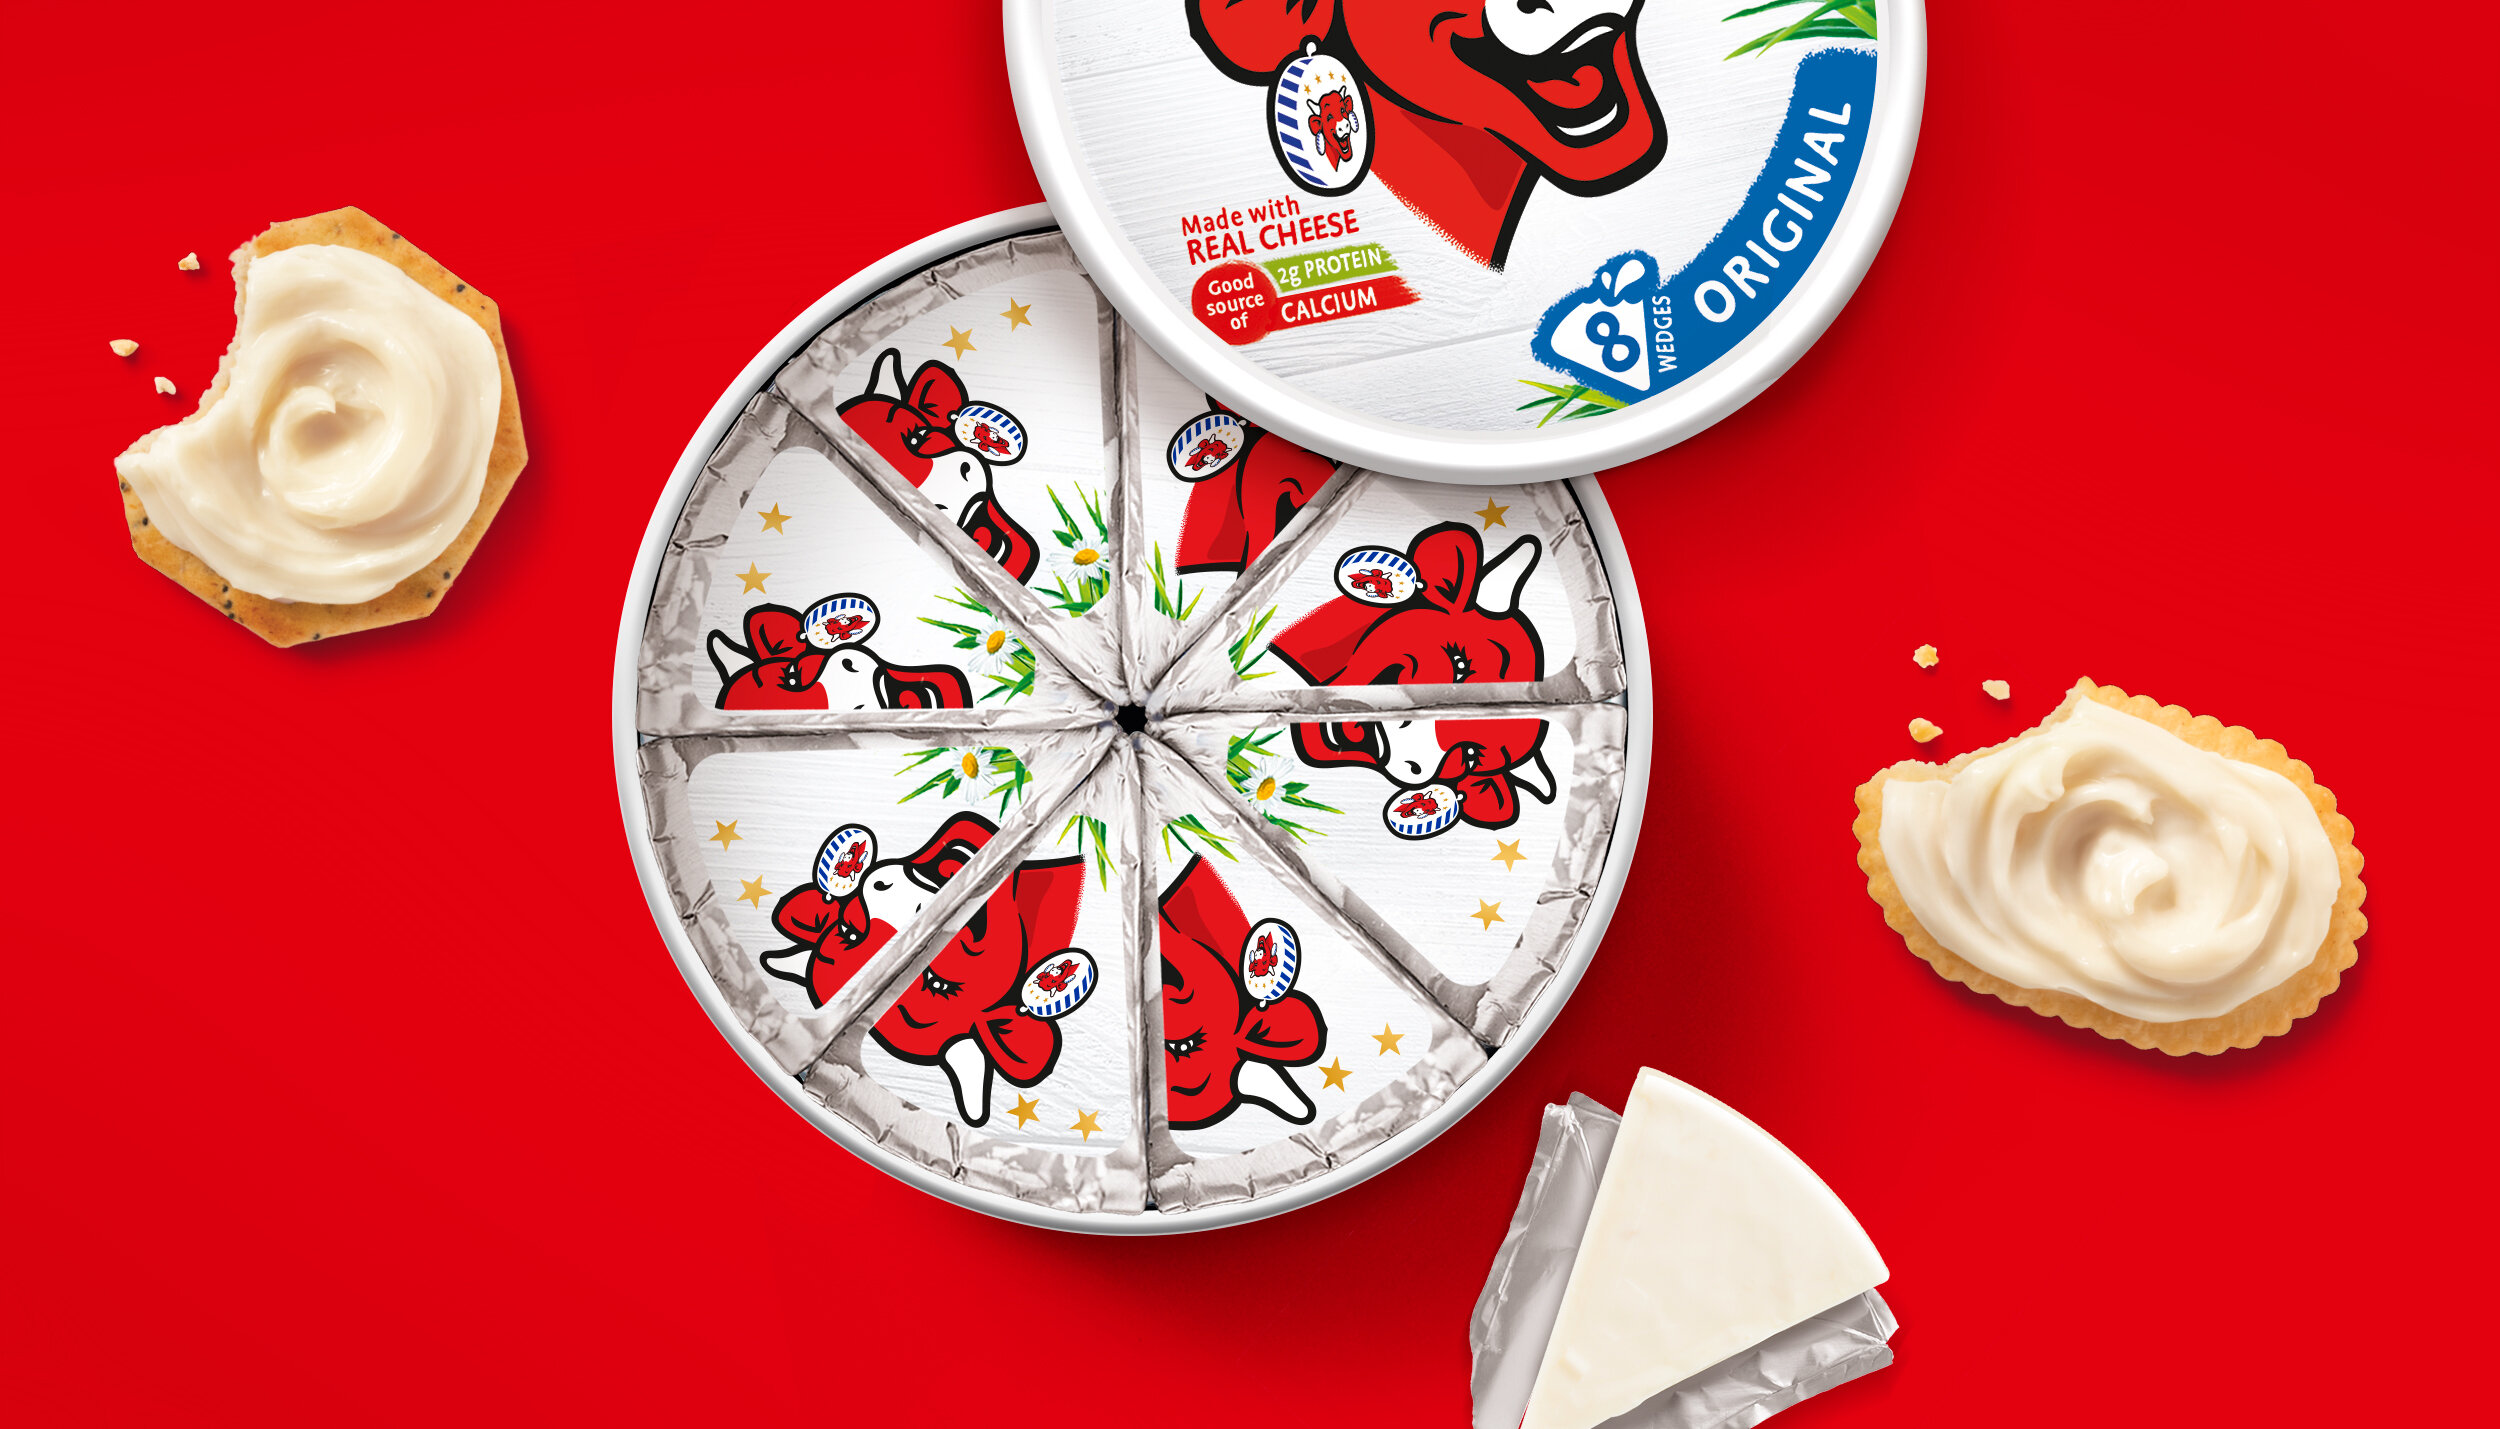 Laughing Cow Portions Mockup2 RED.jpg